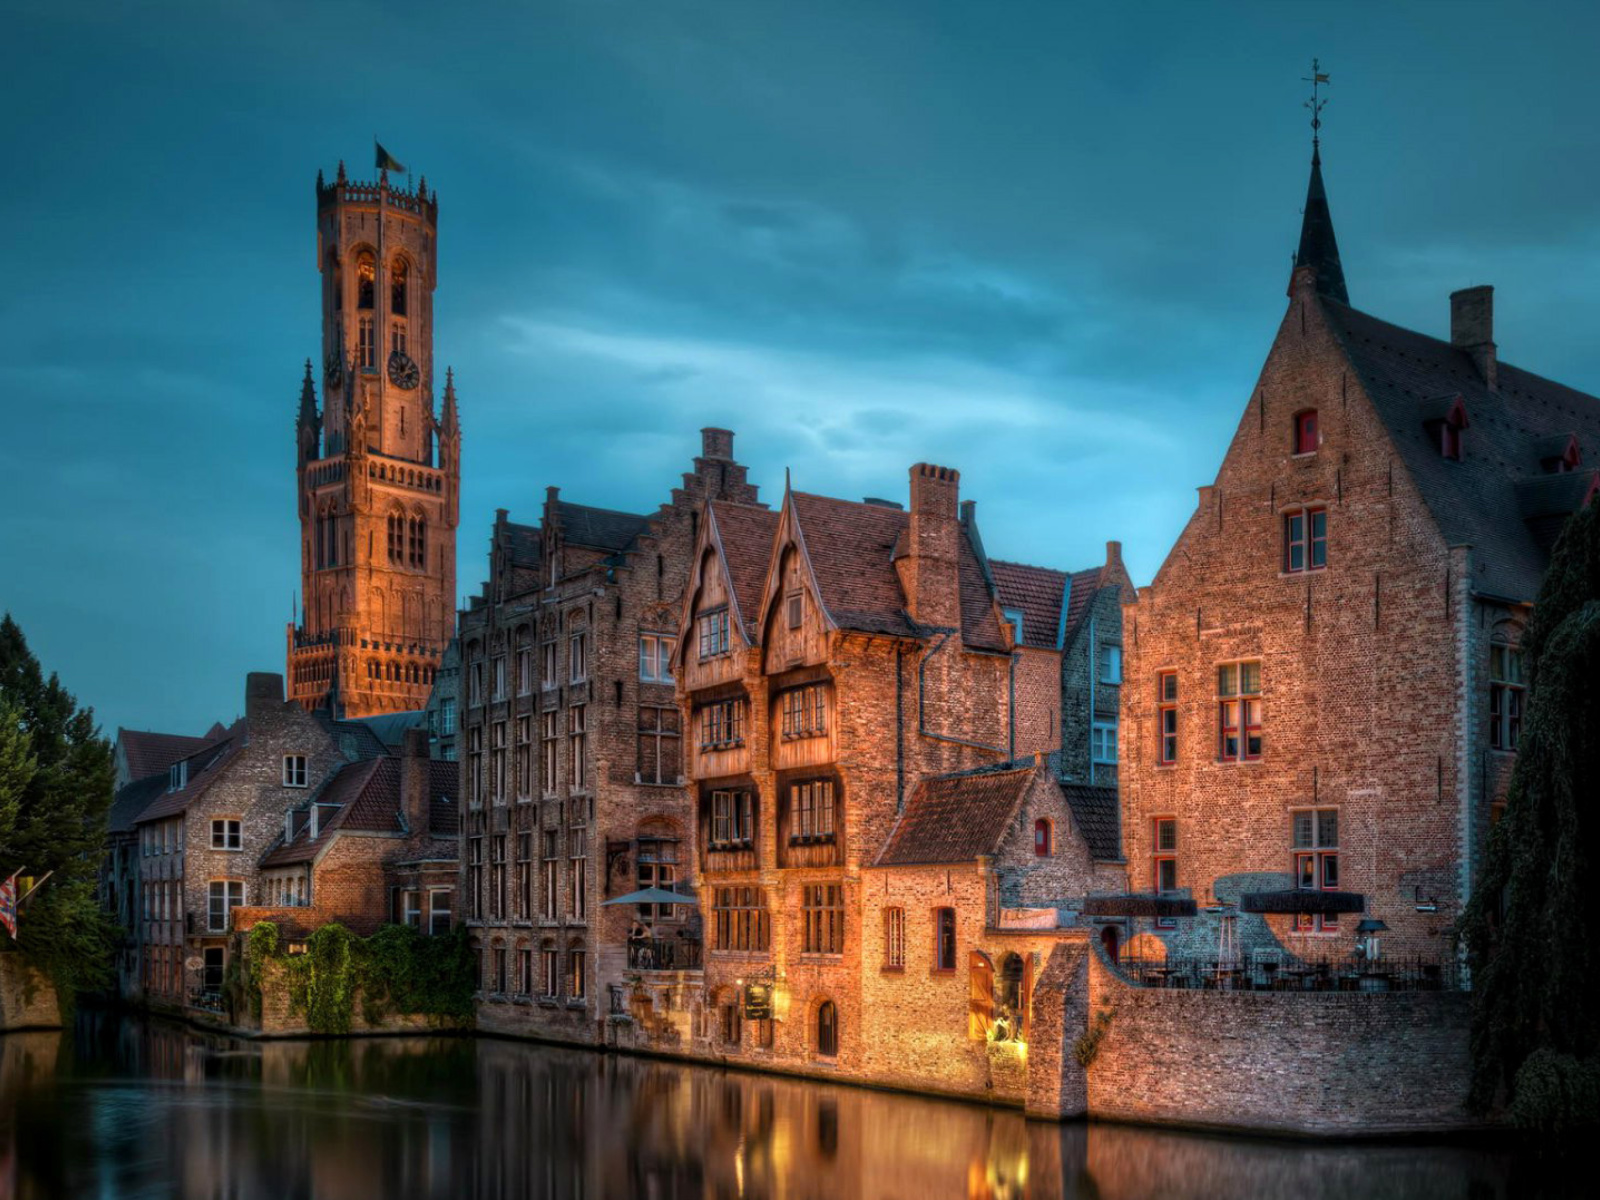 Bruges city on canal screenshot #1 1600x1200